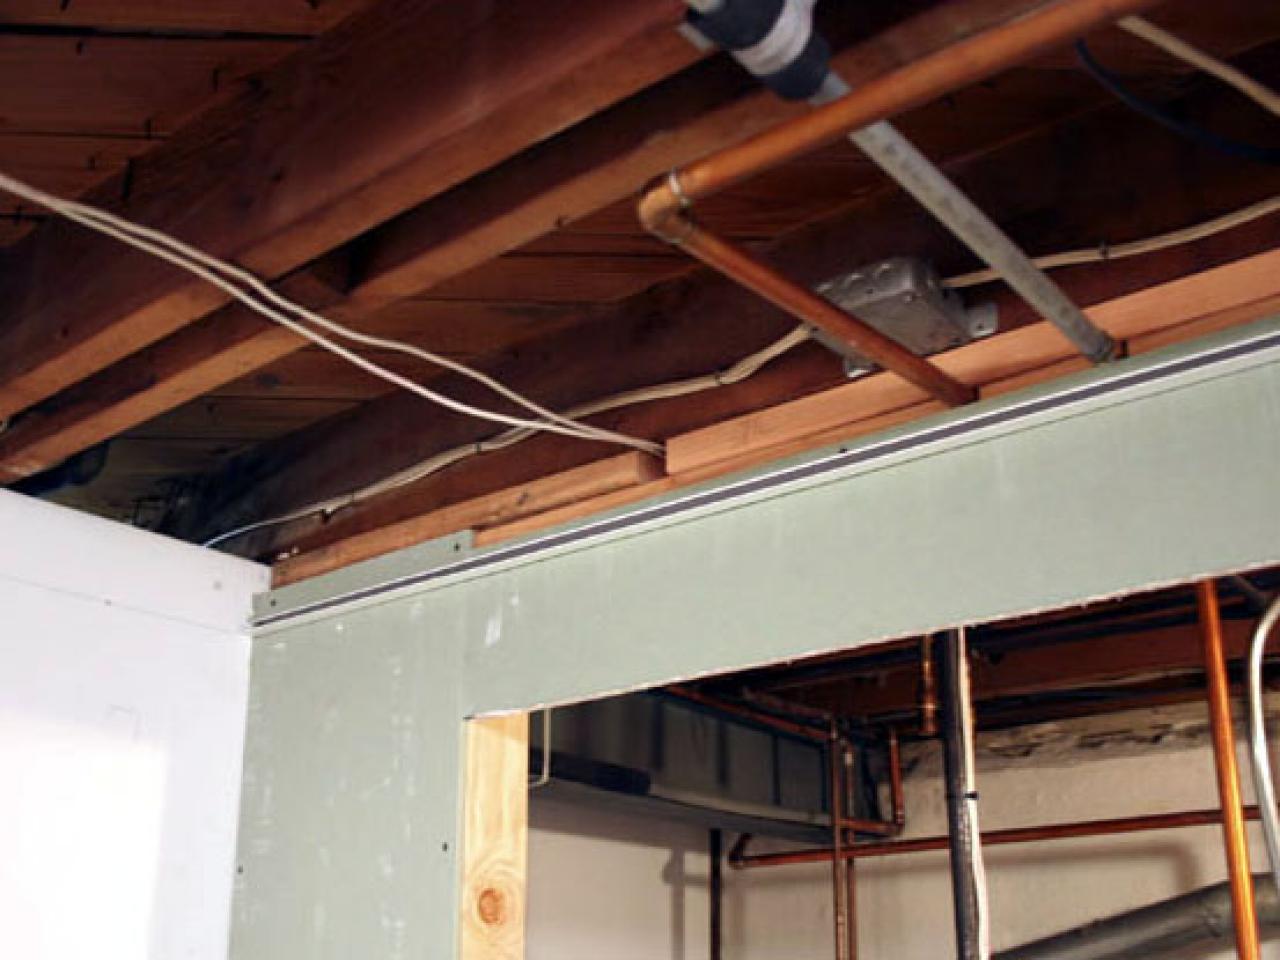 Installing A Drop Ceiling In Basement Laundry - How To Install Ceiling Tiles In Basement